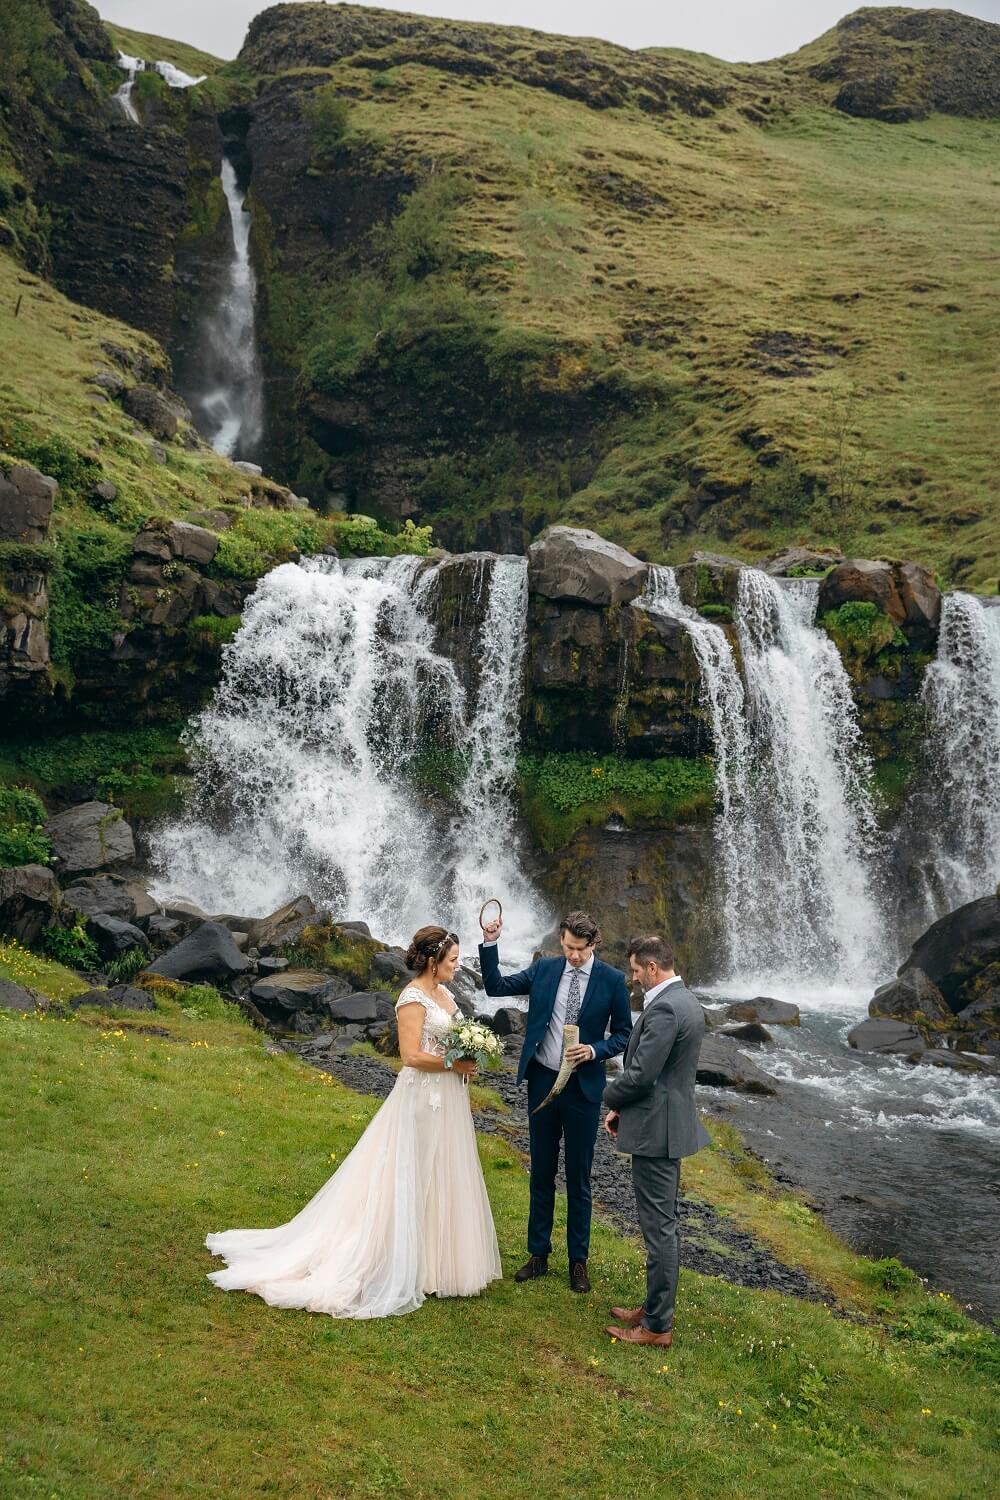 A wedding couple gets married in a pagan ceremony in front of Gluggafoss waterfall.